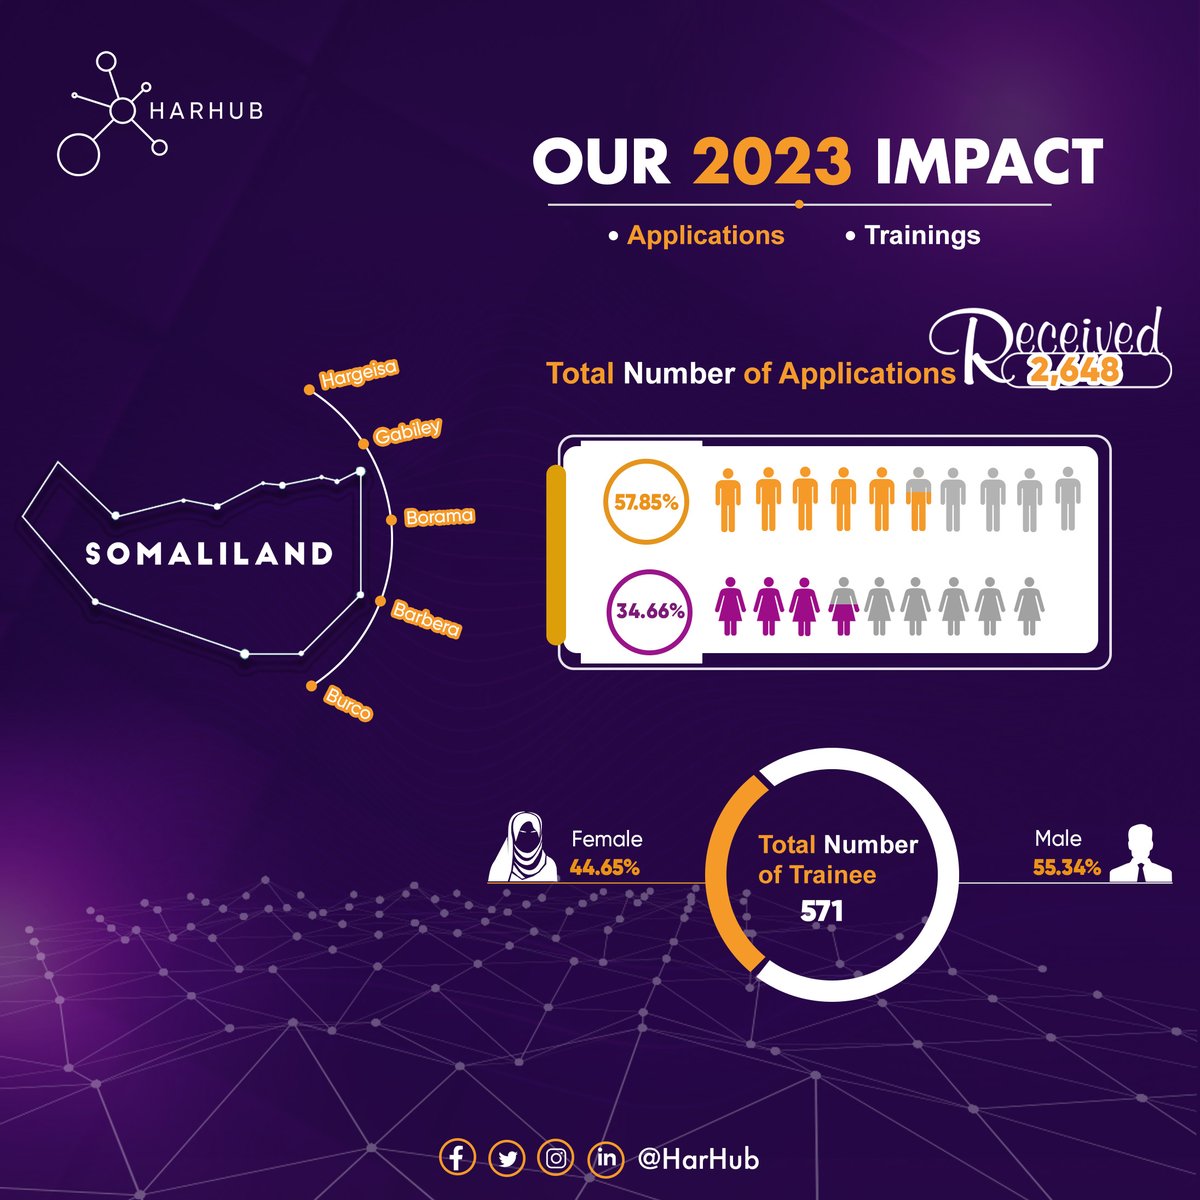 🌟 2023 Impact Snapshot 🚀
We Celebrating a year of transformative change! Our dedication has reshaped our society. Check out our journey so far in the graphic below. Stay connected for updates, impact stories, and more! 🌟🔗 #Impact2023 #TransformativeChange